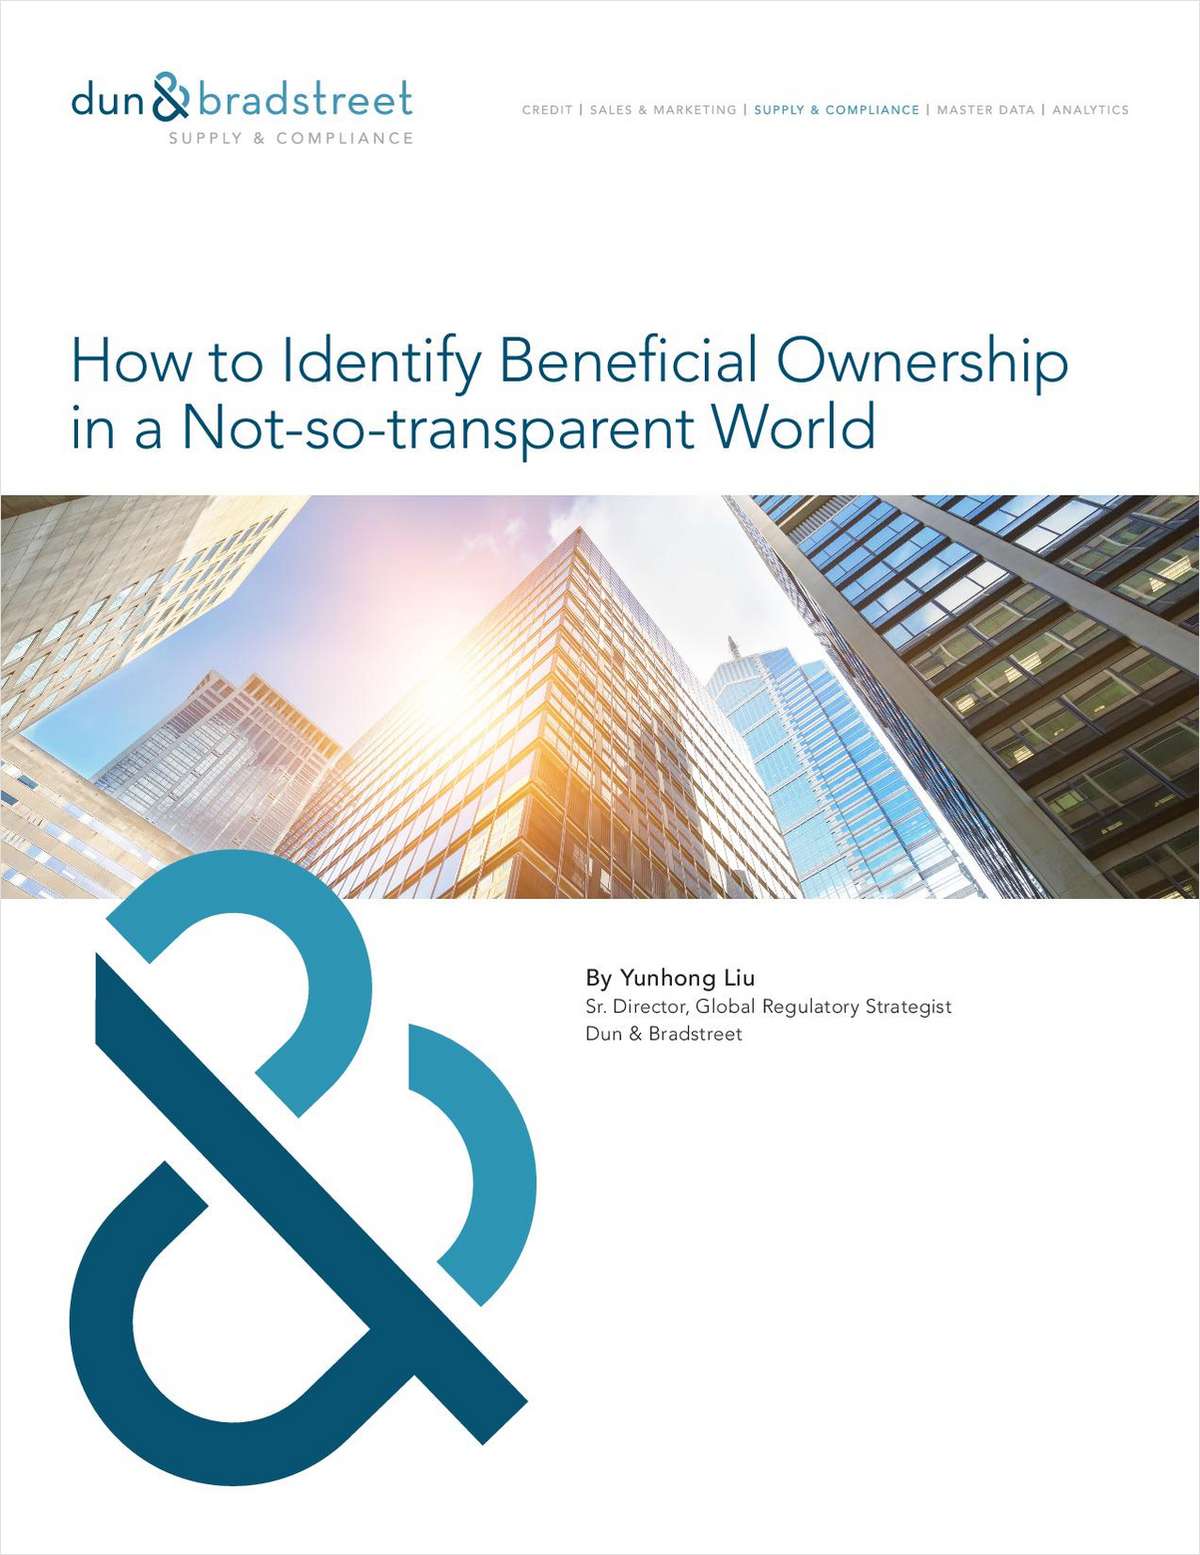 Identify Beneficial Ownership in a Not-so-transparent World